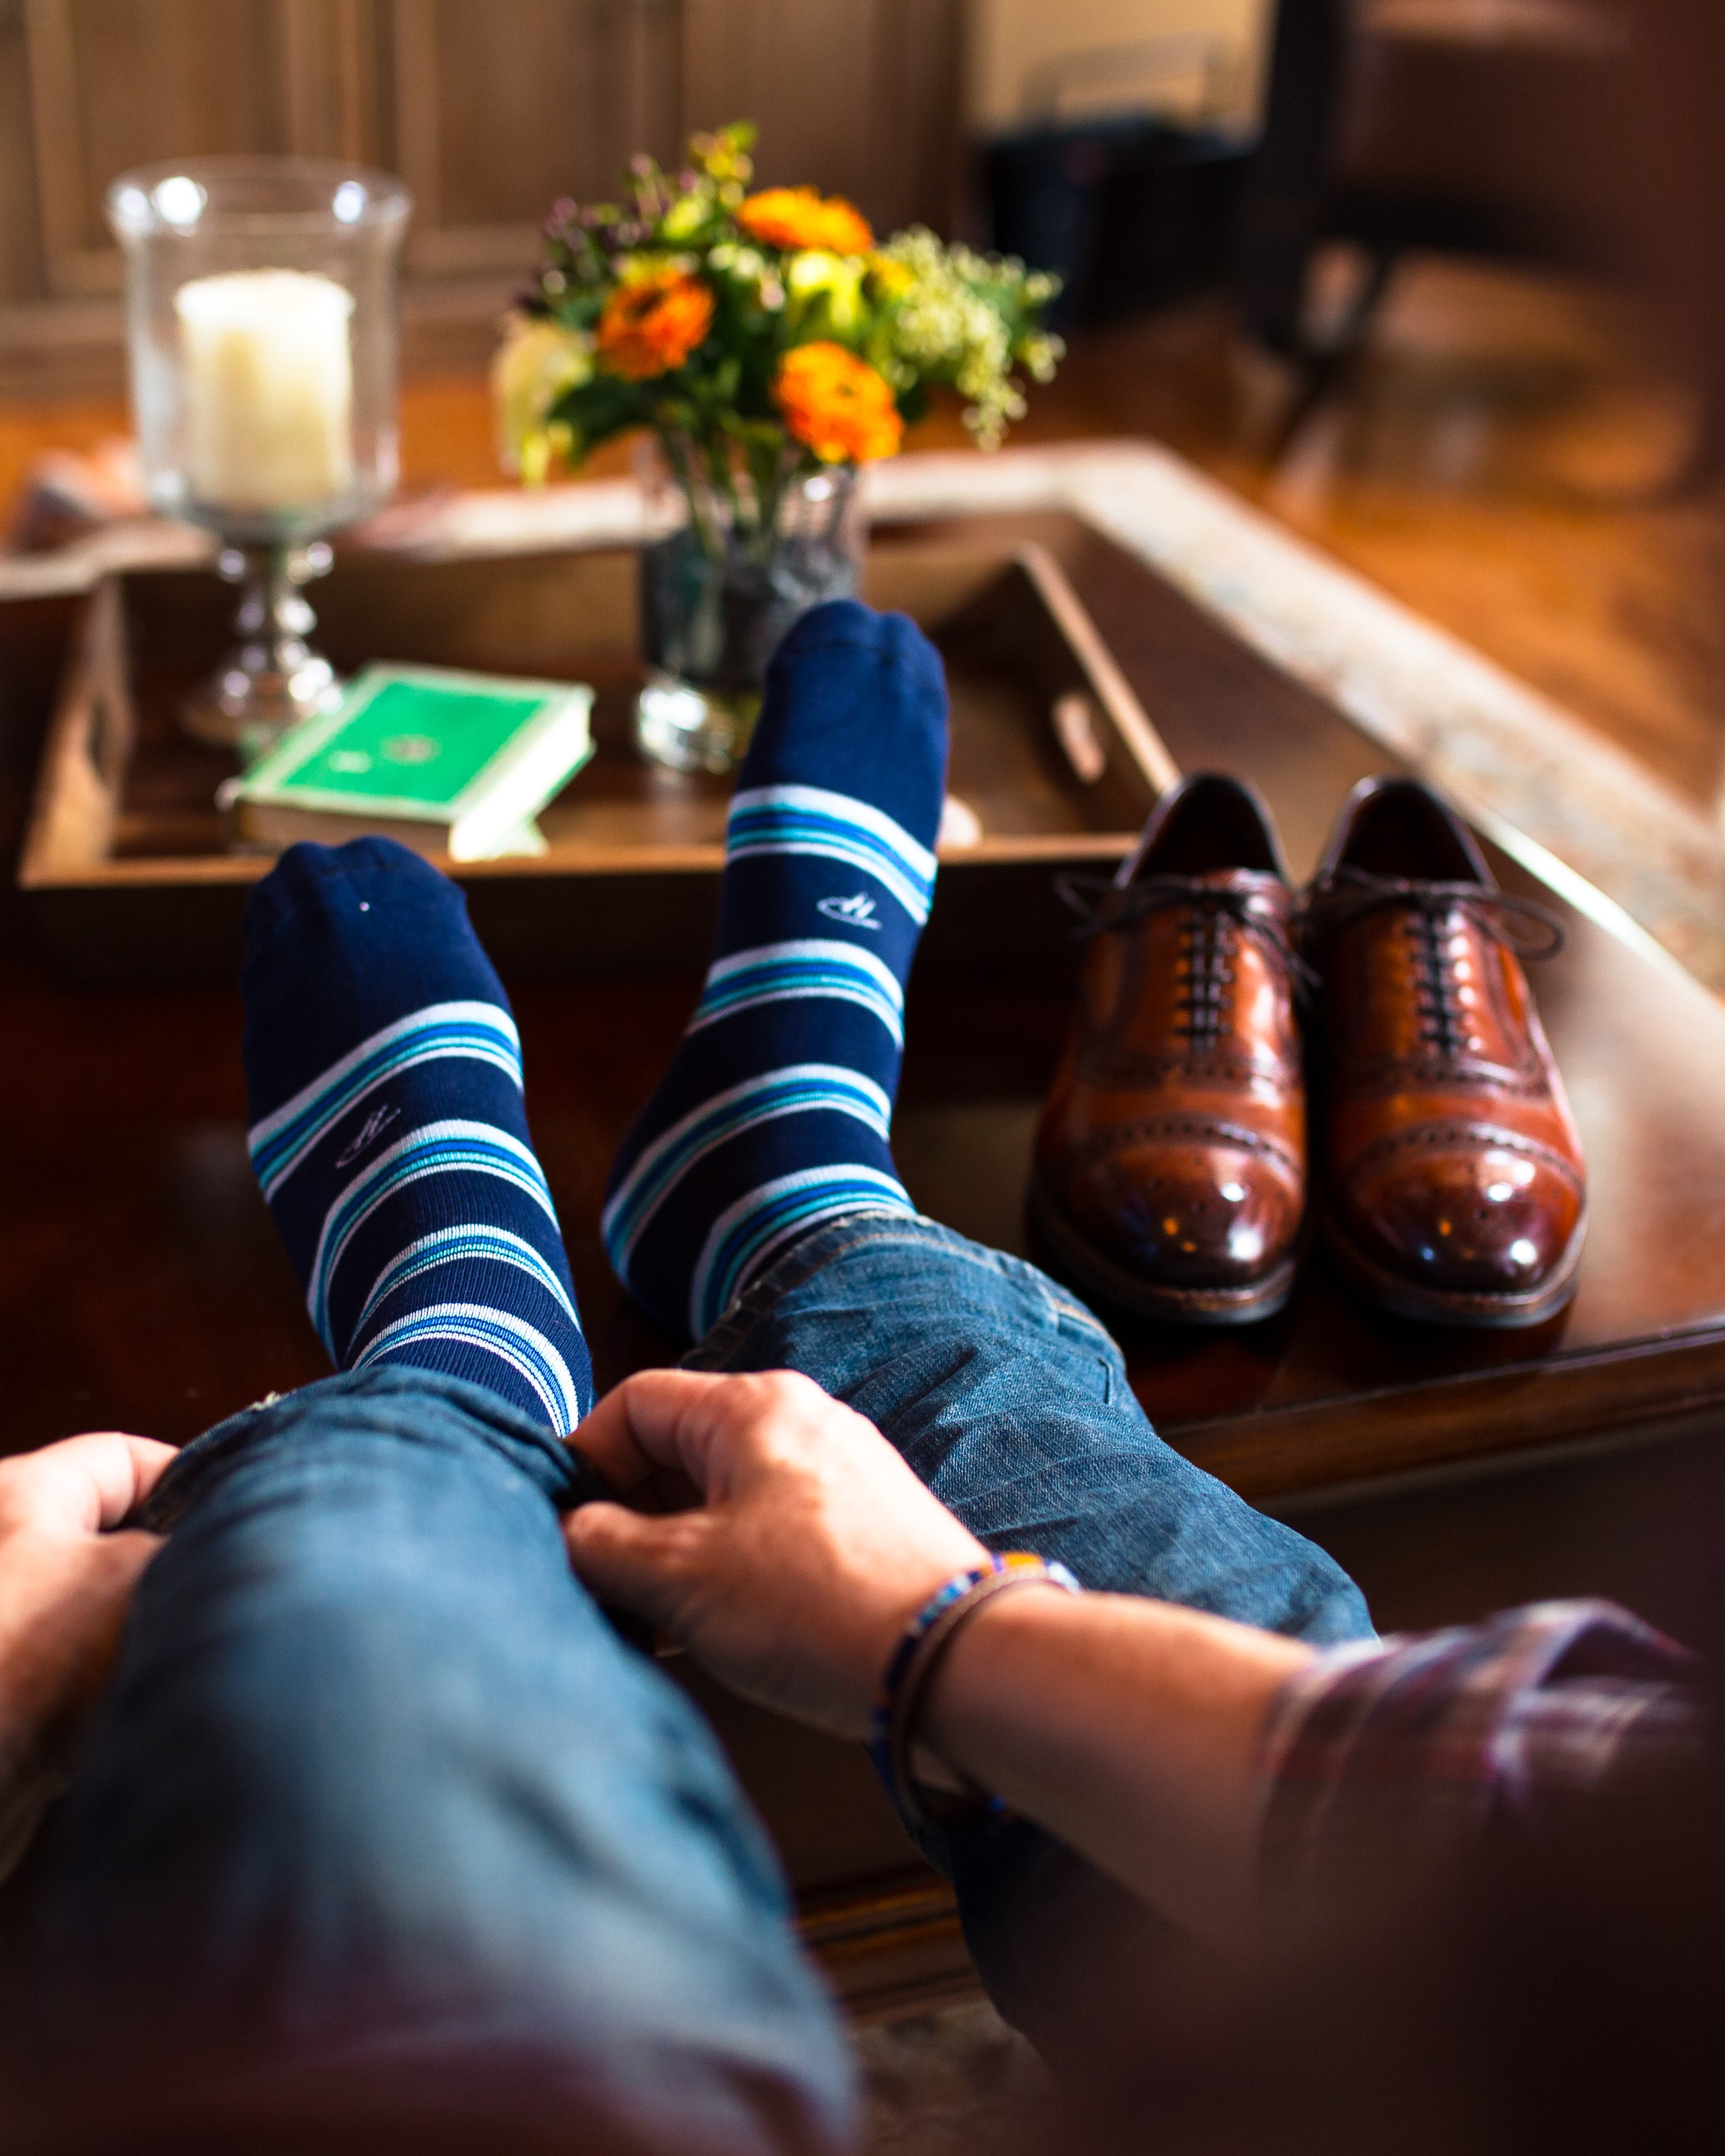 navy blue dress socks with light blue and blue stripes, brown dress shoes on table